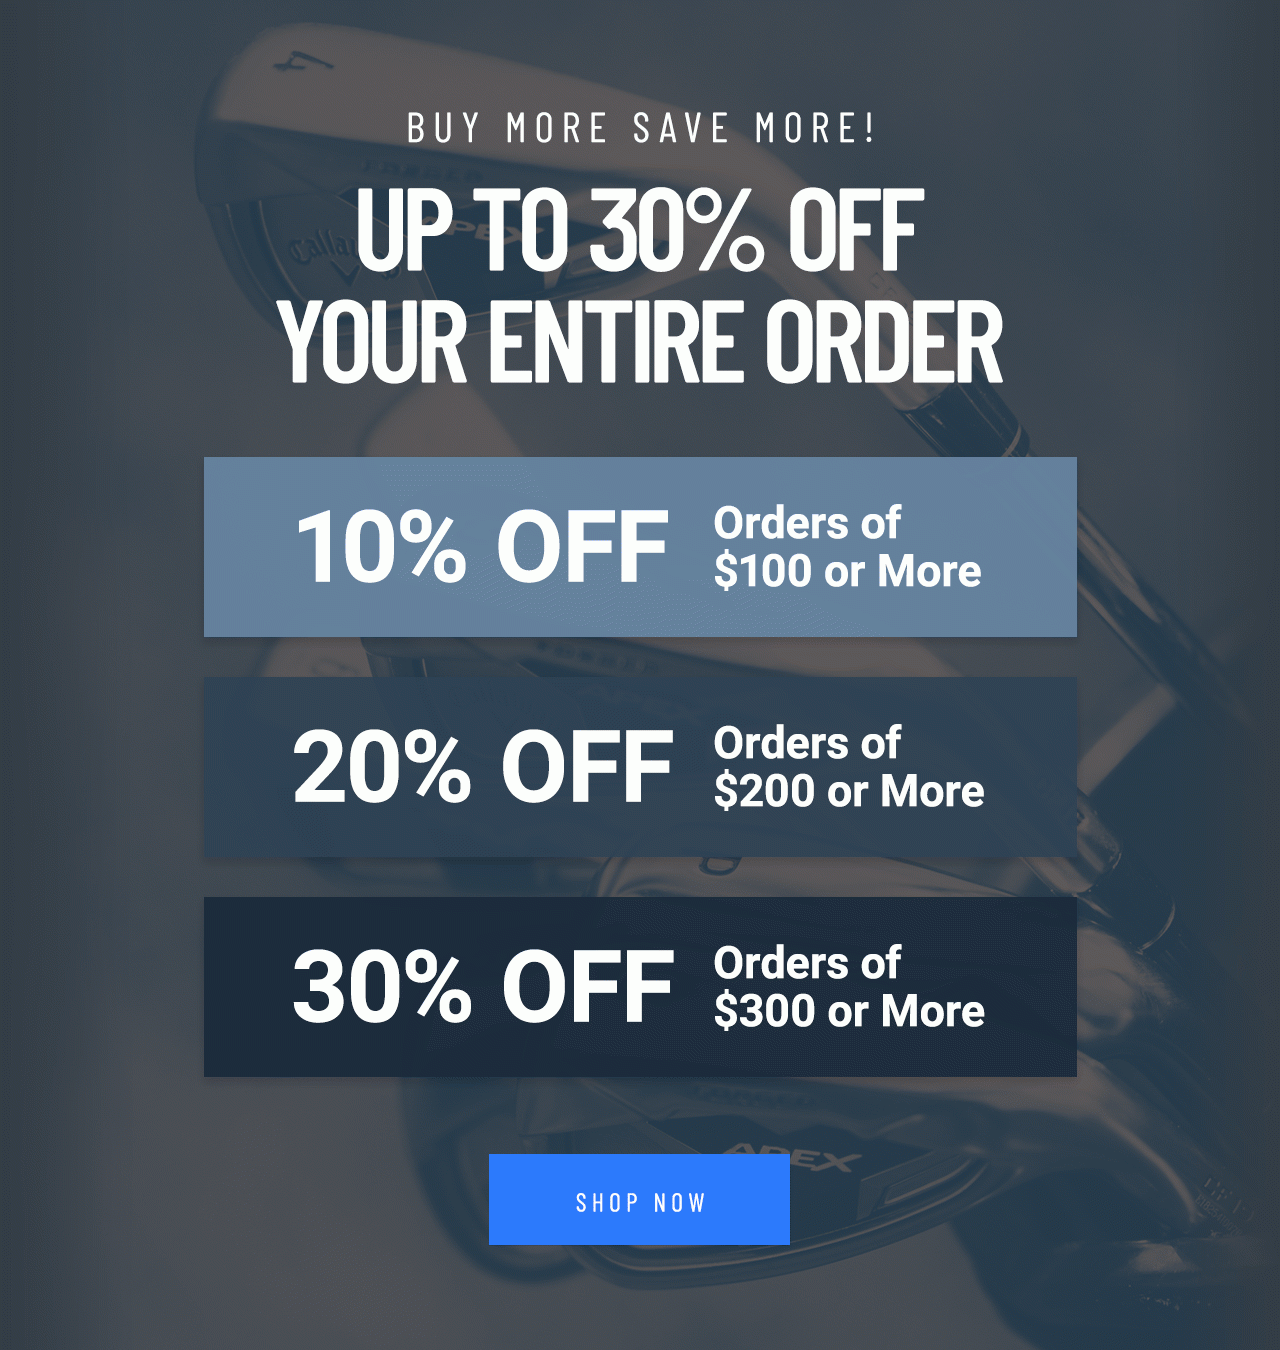 UP TO 30% OFF YOUR ENTIRE ORDER! 10% off Orders Of $100 or more, 20% Off Orders of $200 or more, 30% Off Orders of $300 or more.